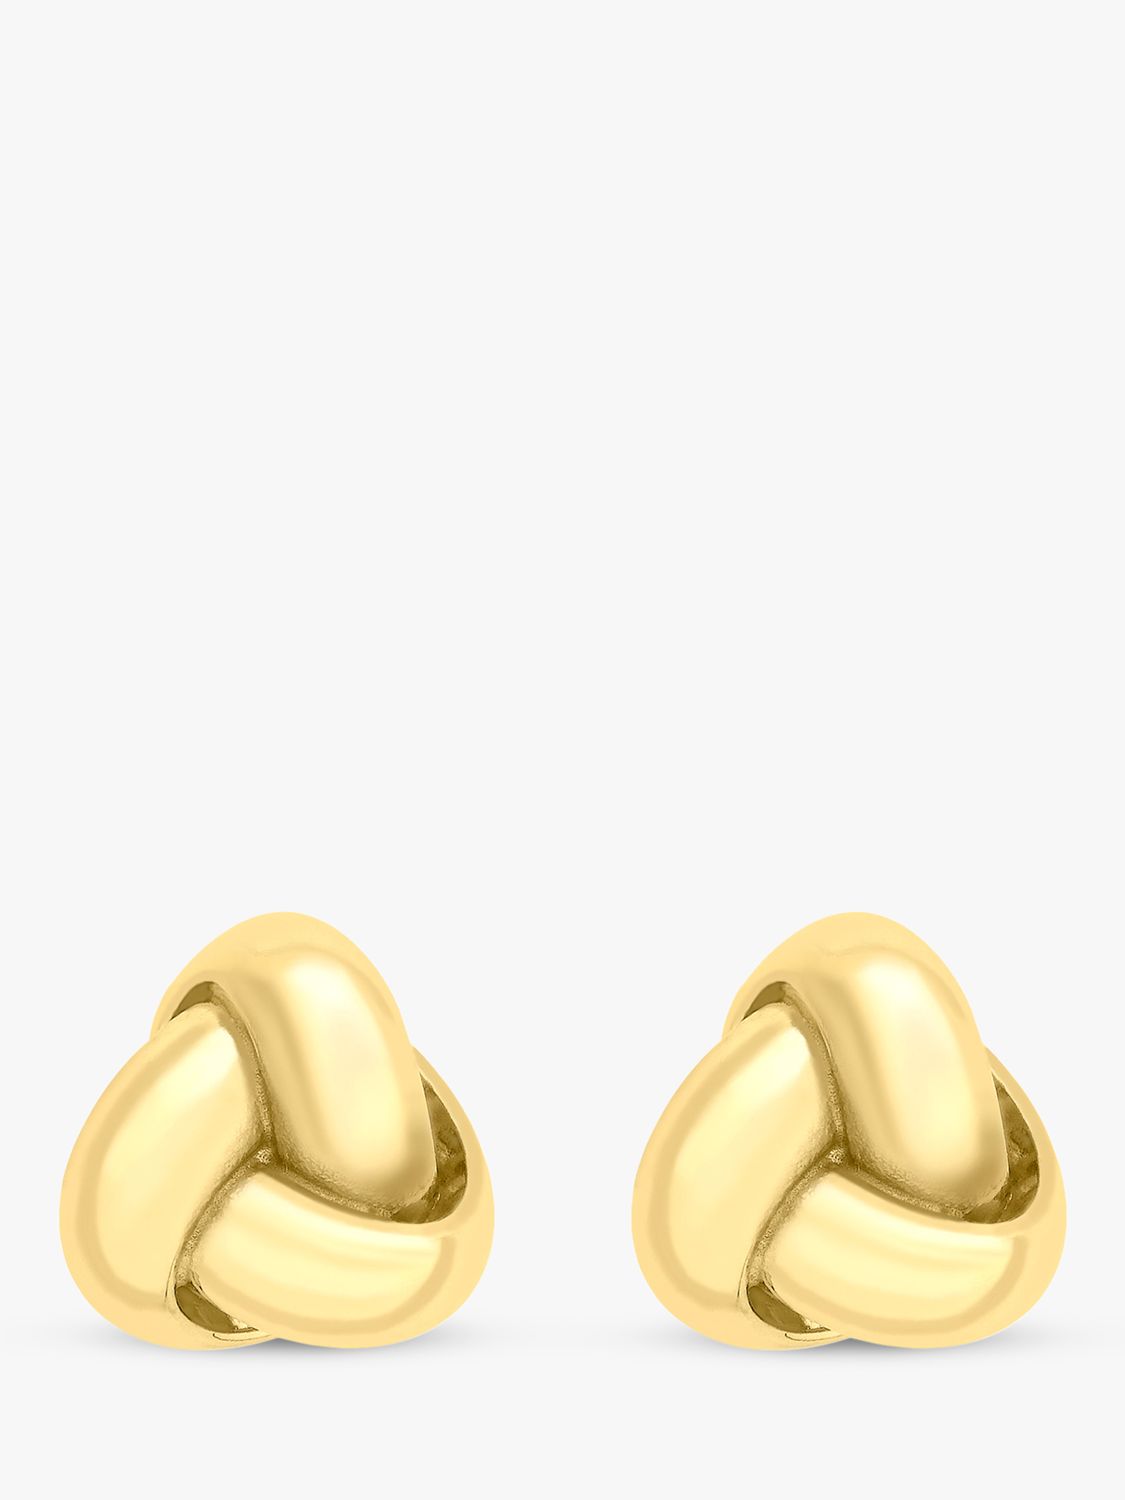 Ibb 9ct Gold Knot Stud Earrings Gold At John Lewis Partners